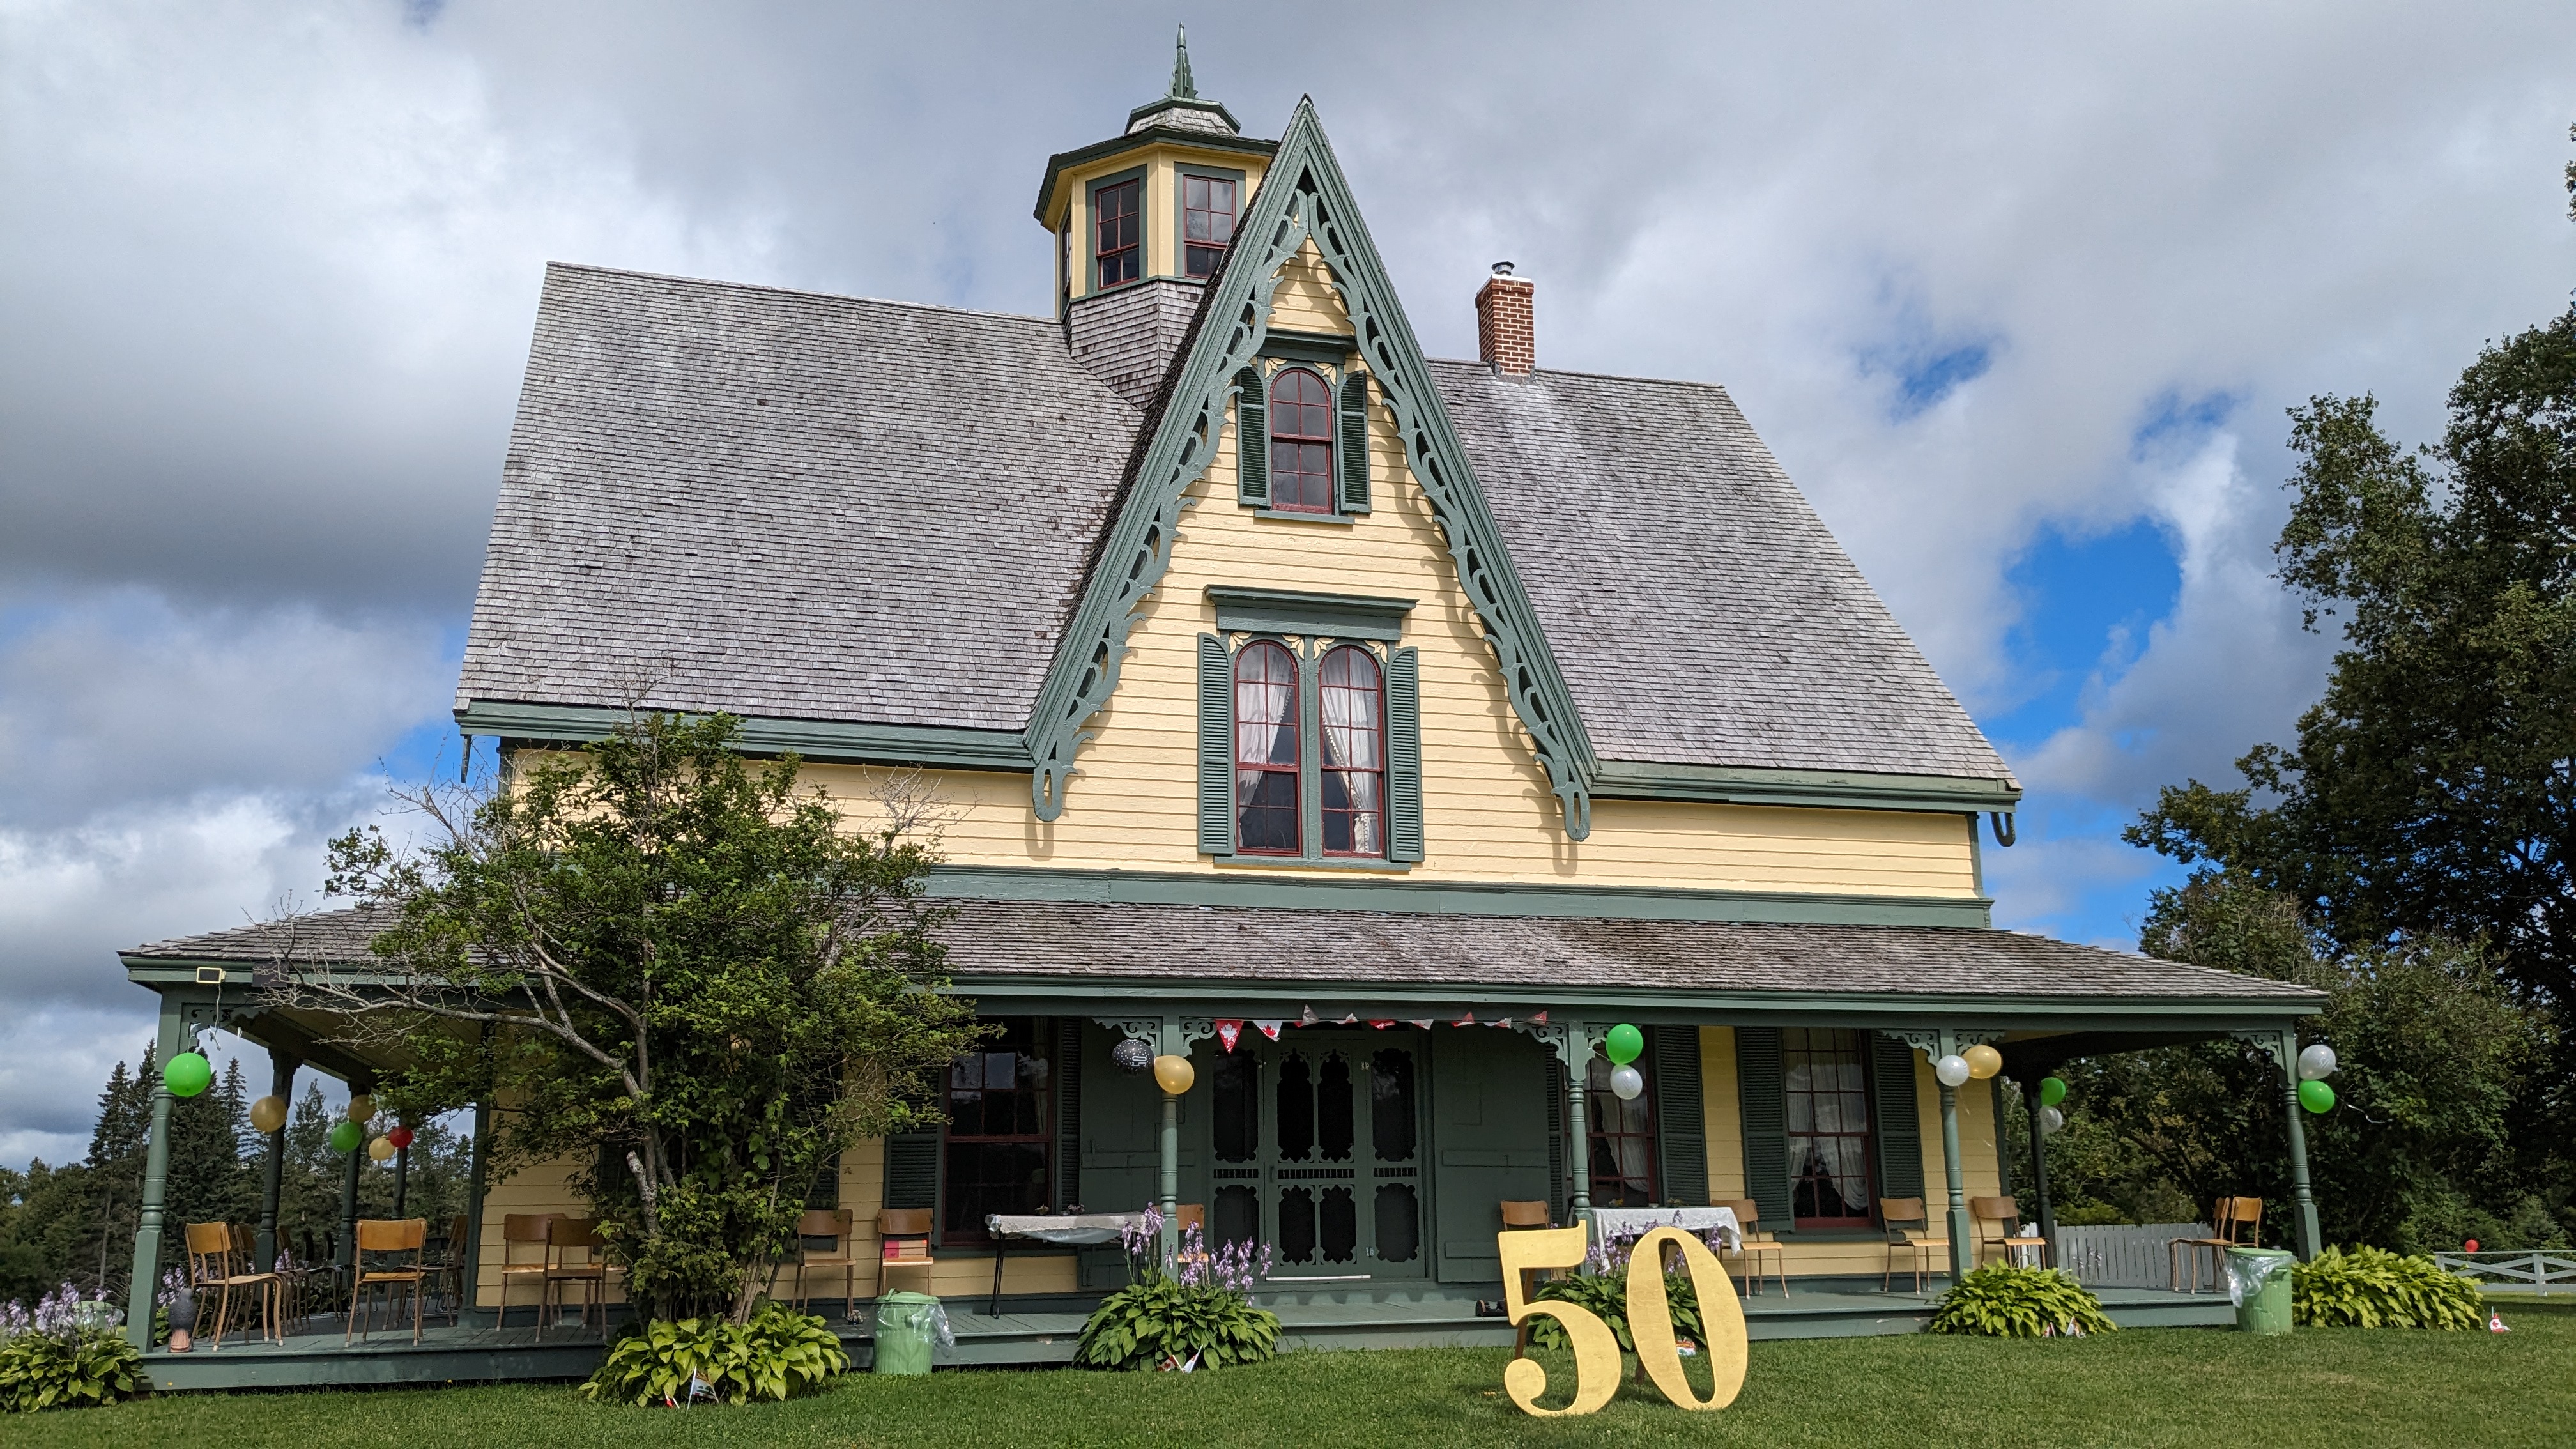 A large yellow house with a giant 50 in front.